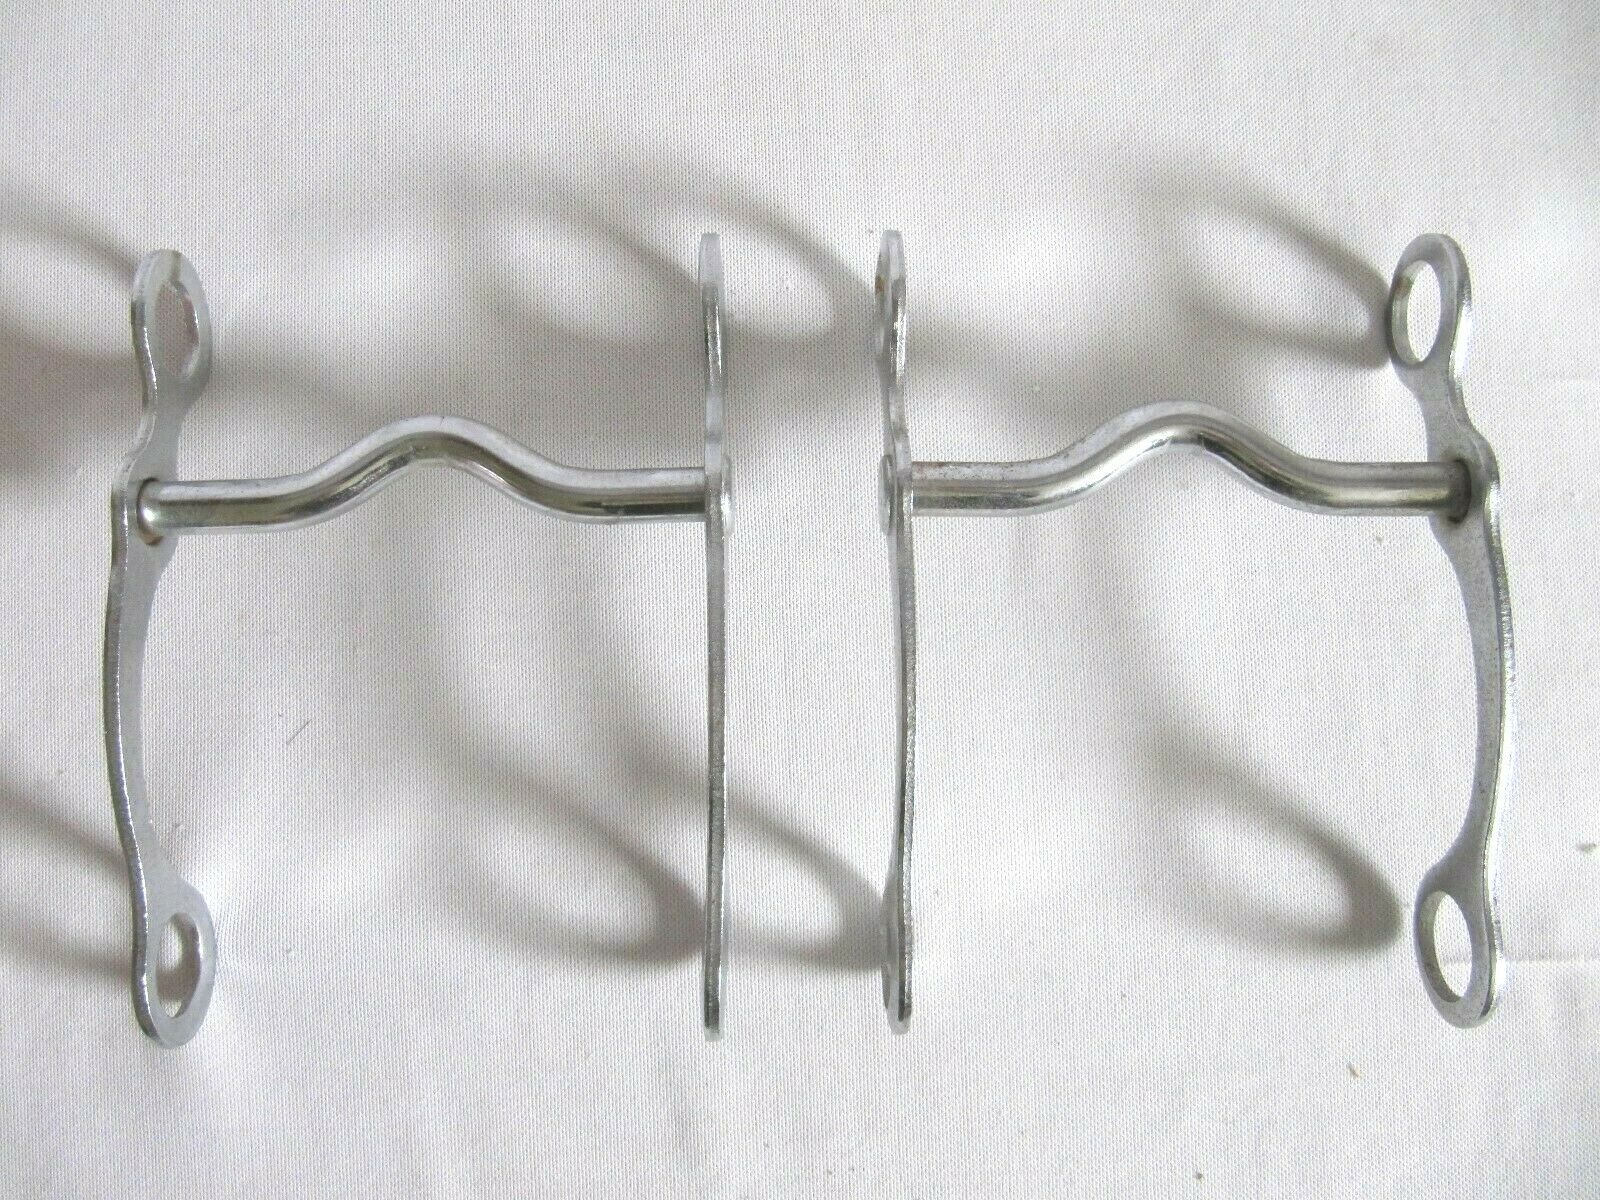 Two (2) Vintage Western Horse Bits - Decor Crafts Riding